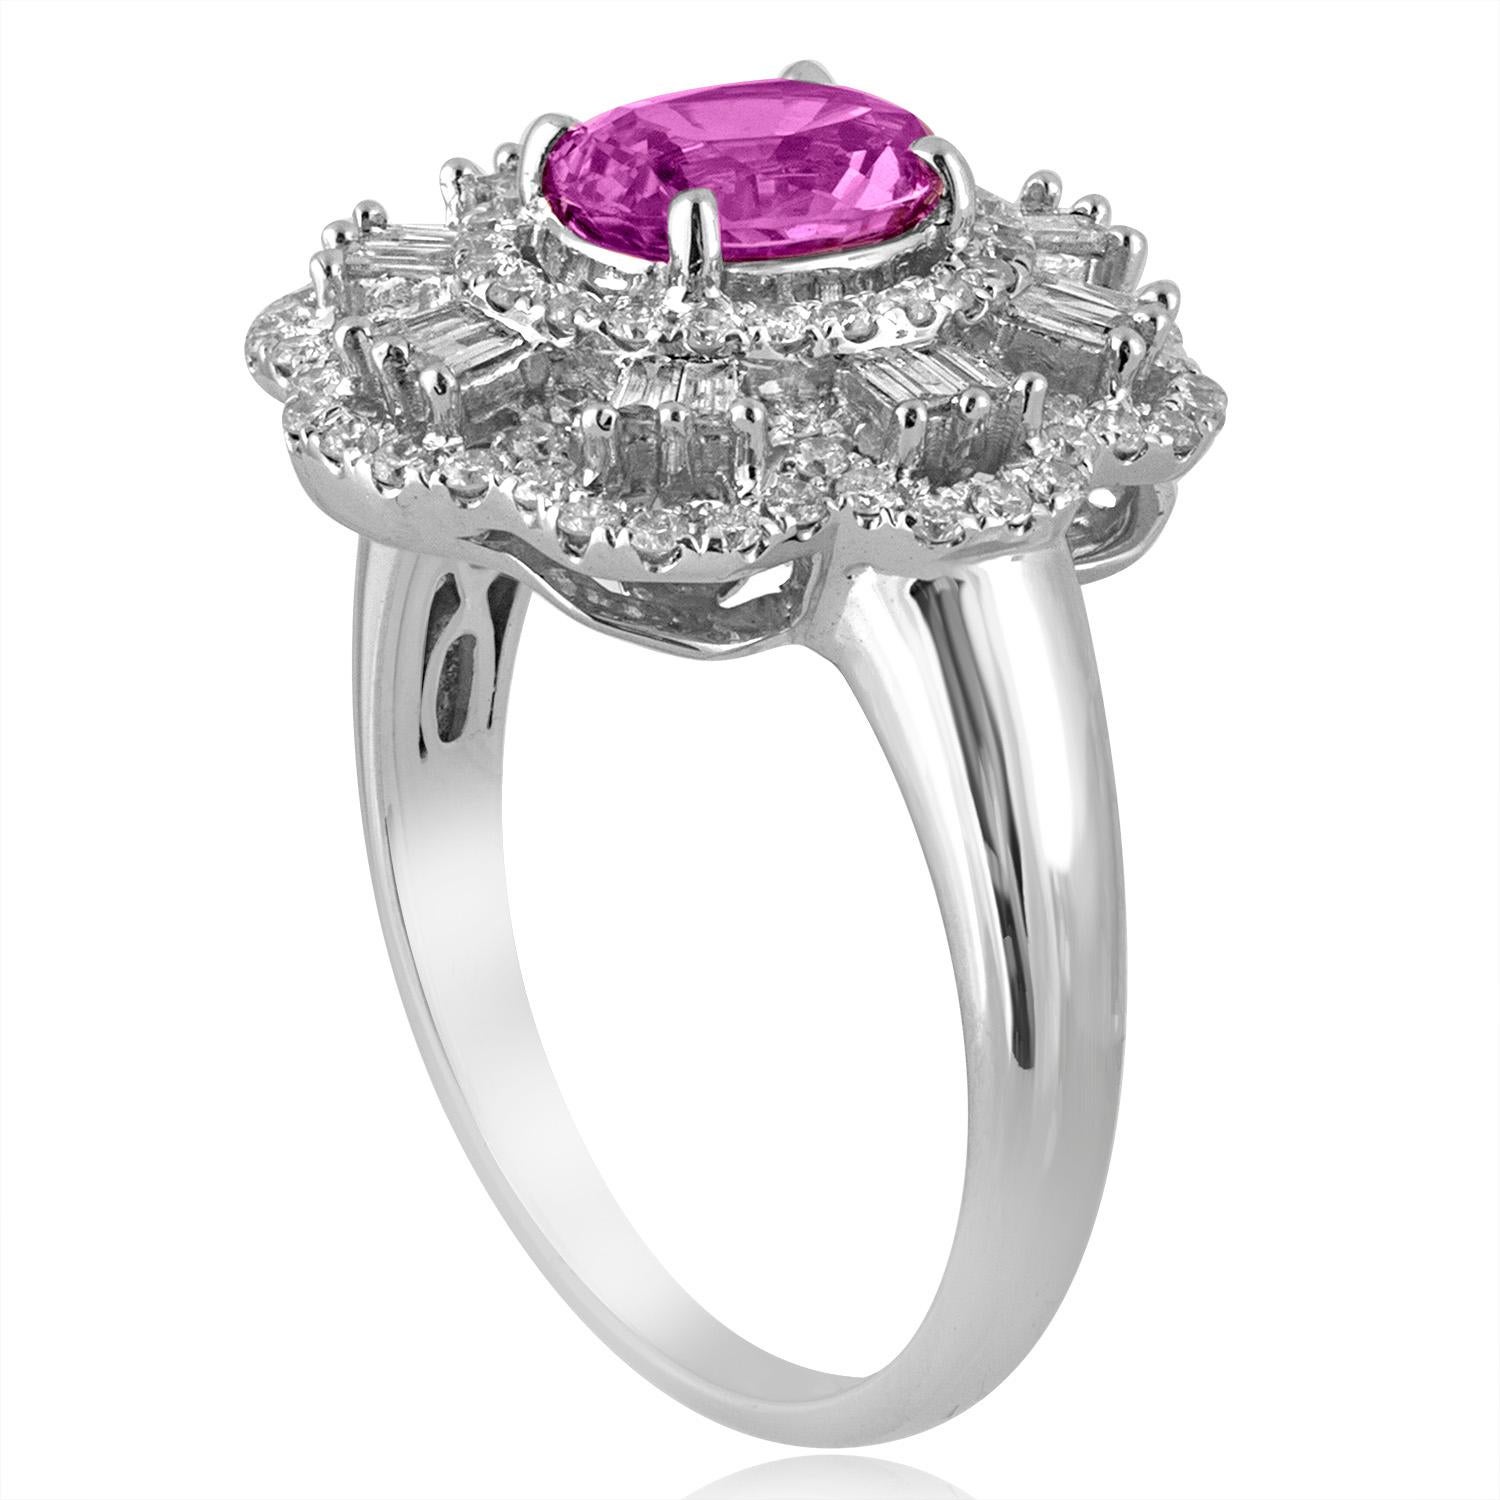 Stunning Pink Sapphire Cocktail Ring
The ring is 18K White Gold
There are 0.88 Carats in Diamonds F/G VS/SI
The Sapphire is Oval Pink Oval 1.27 Carats, HEATED.
The Sapphire is certified by LAPIS.
The ring is a size 7.00, sizable.
The ring weighs 7.0